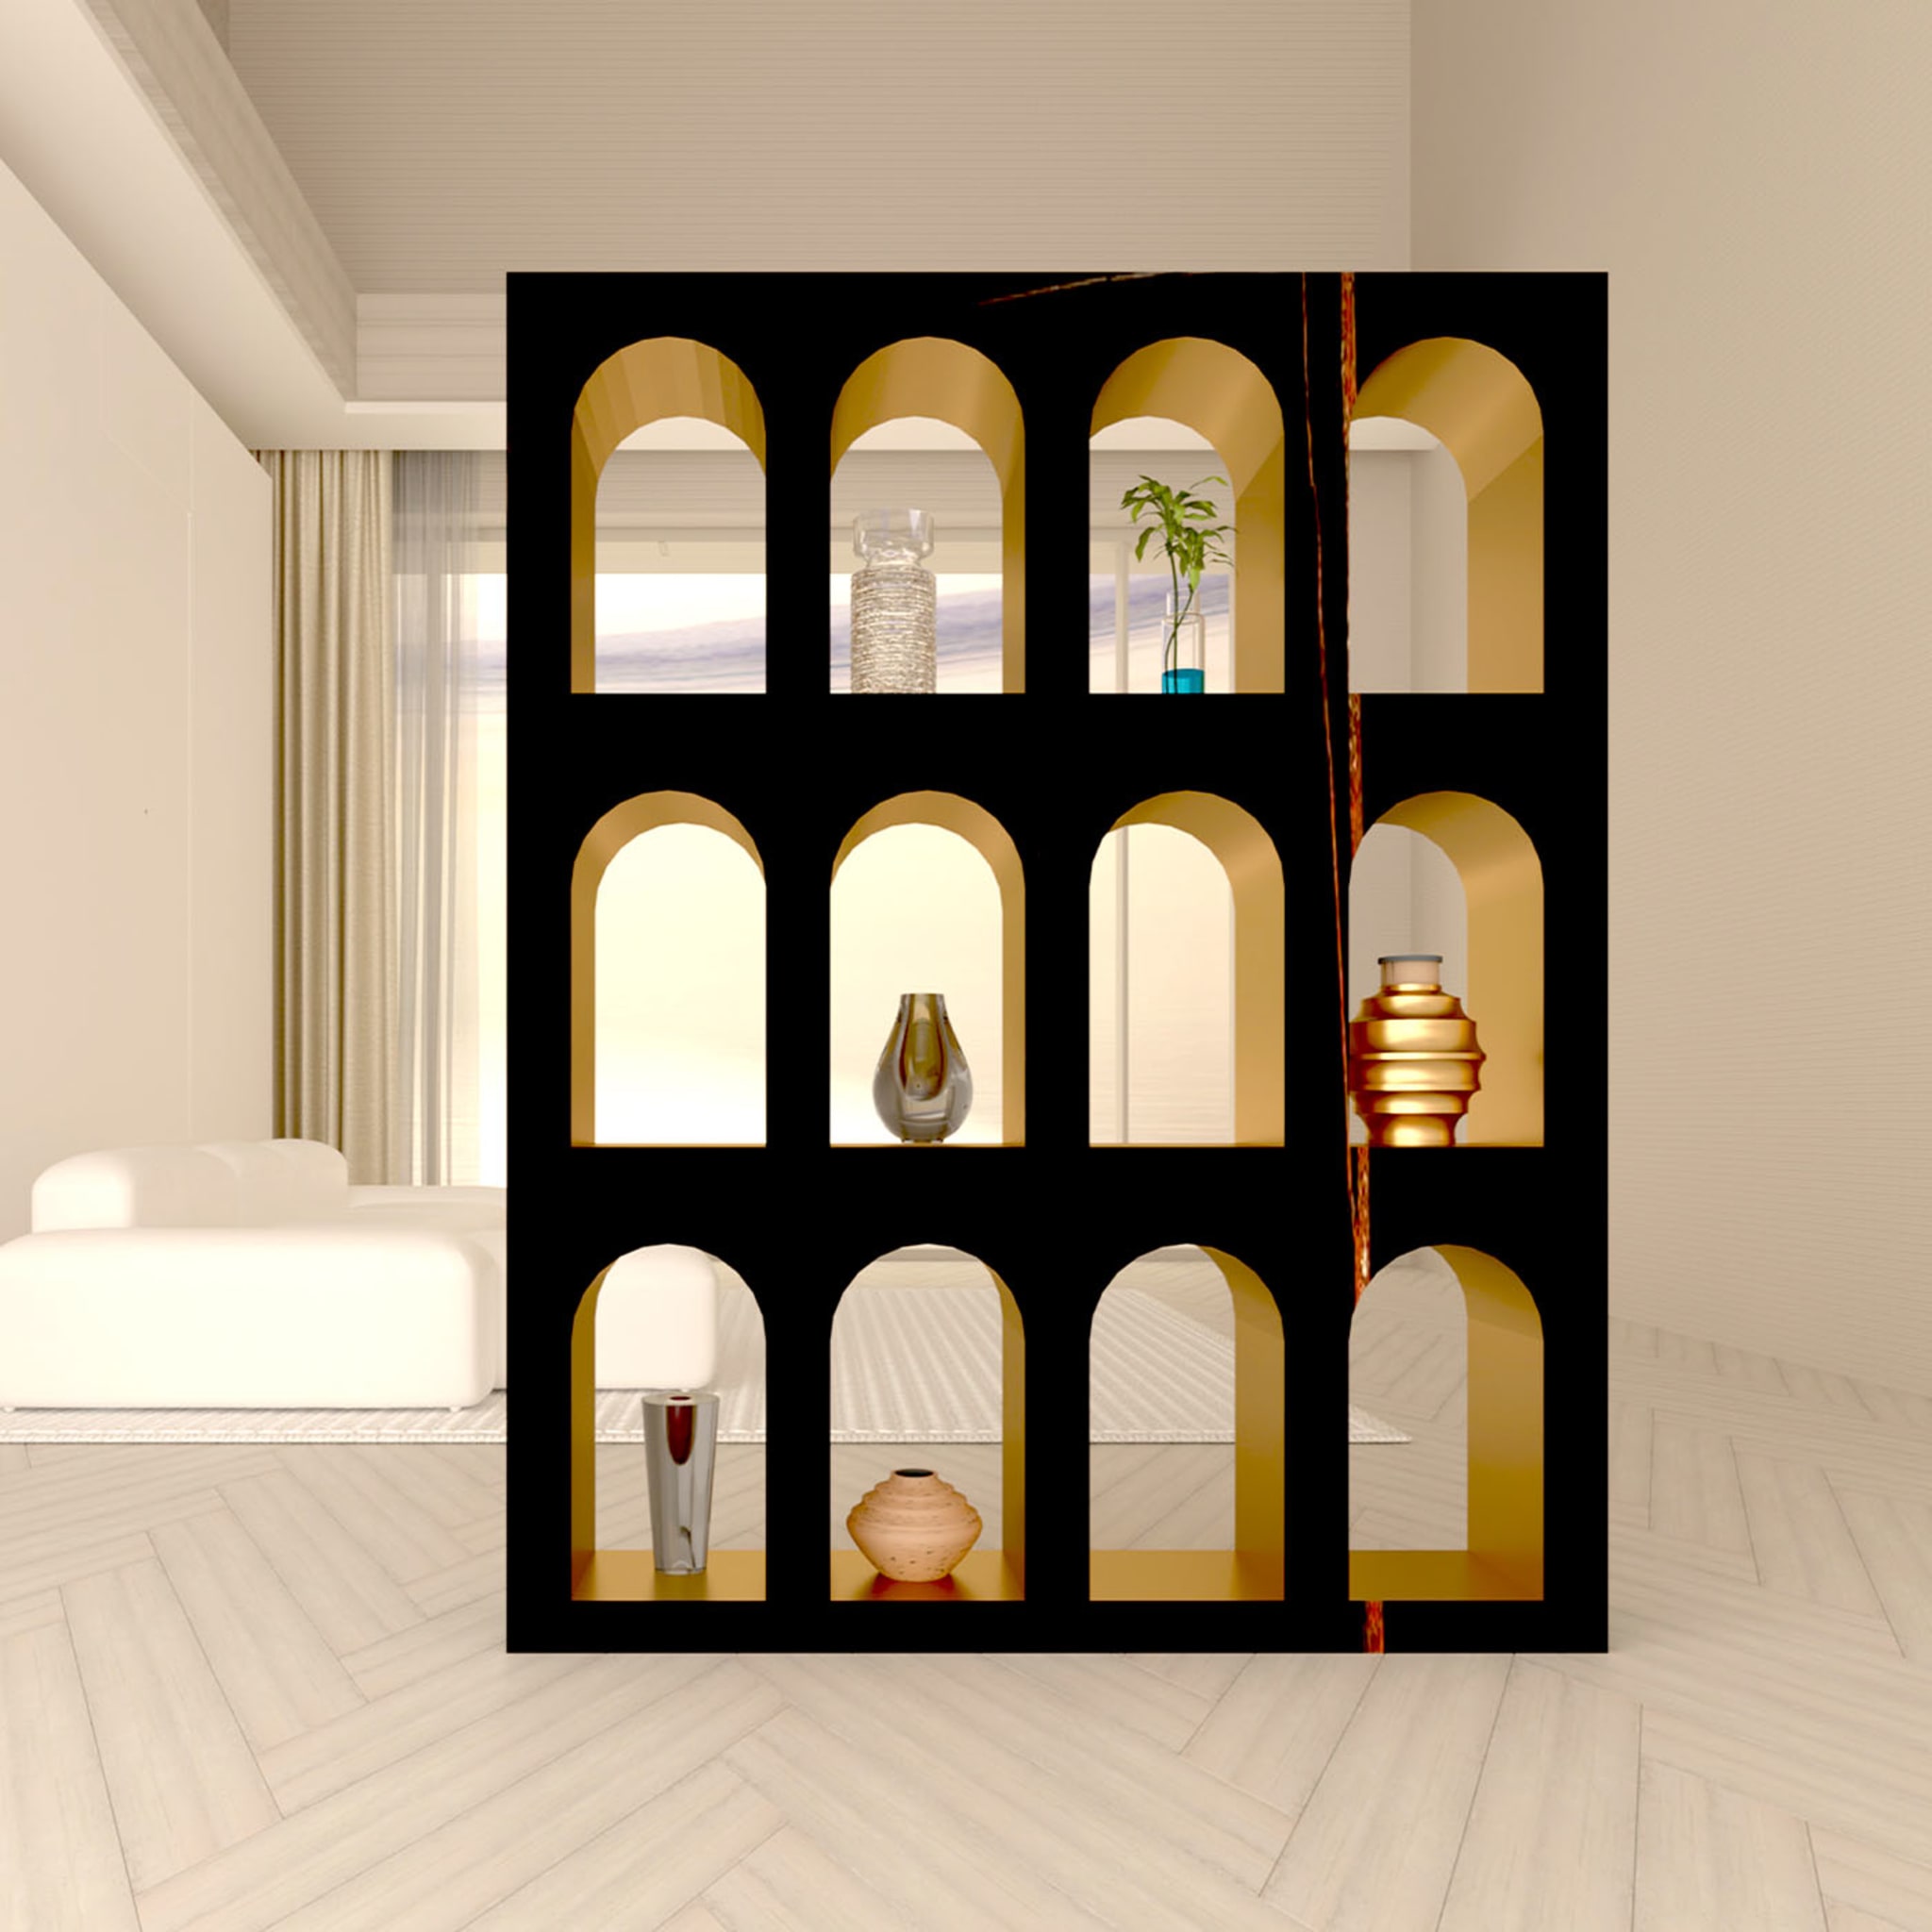 Portici Bookcase in Sahara Noir Marble by sid&sign - Alternative view 3